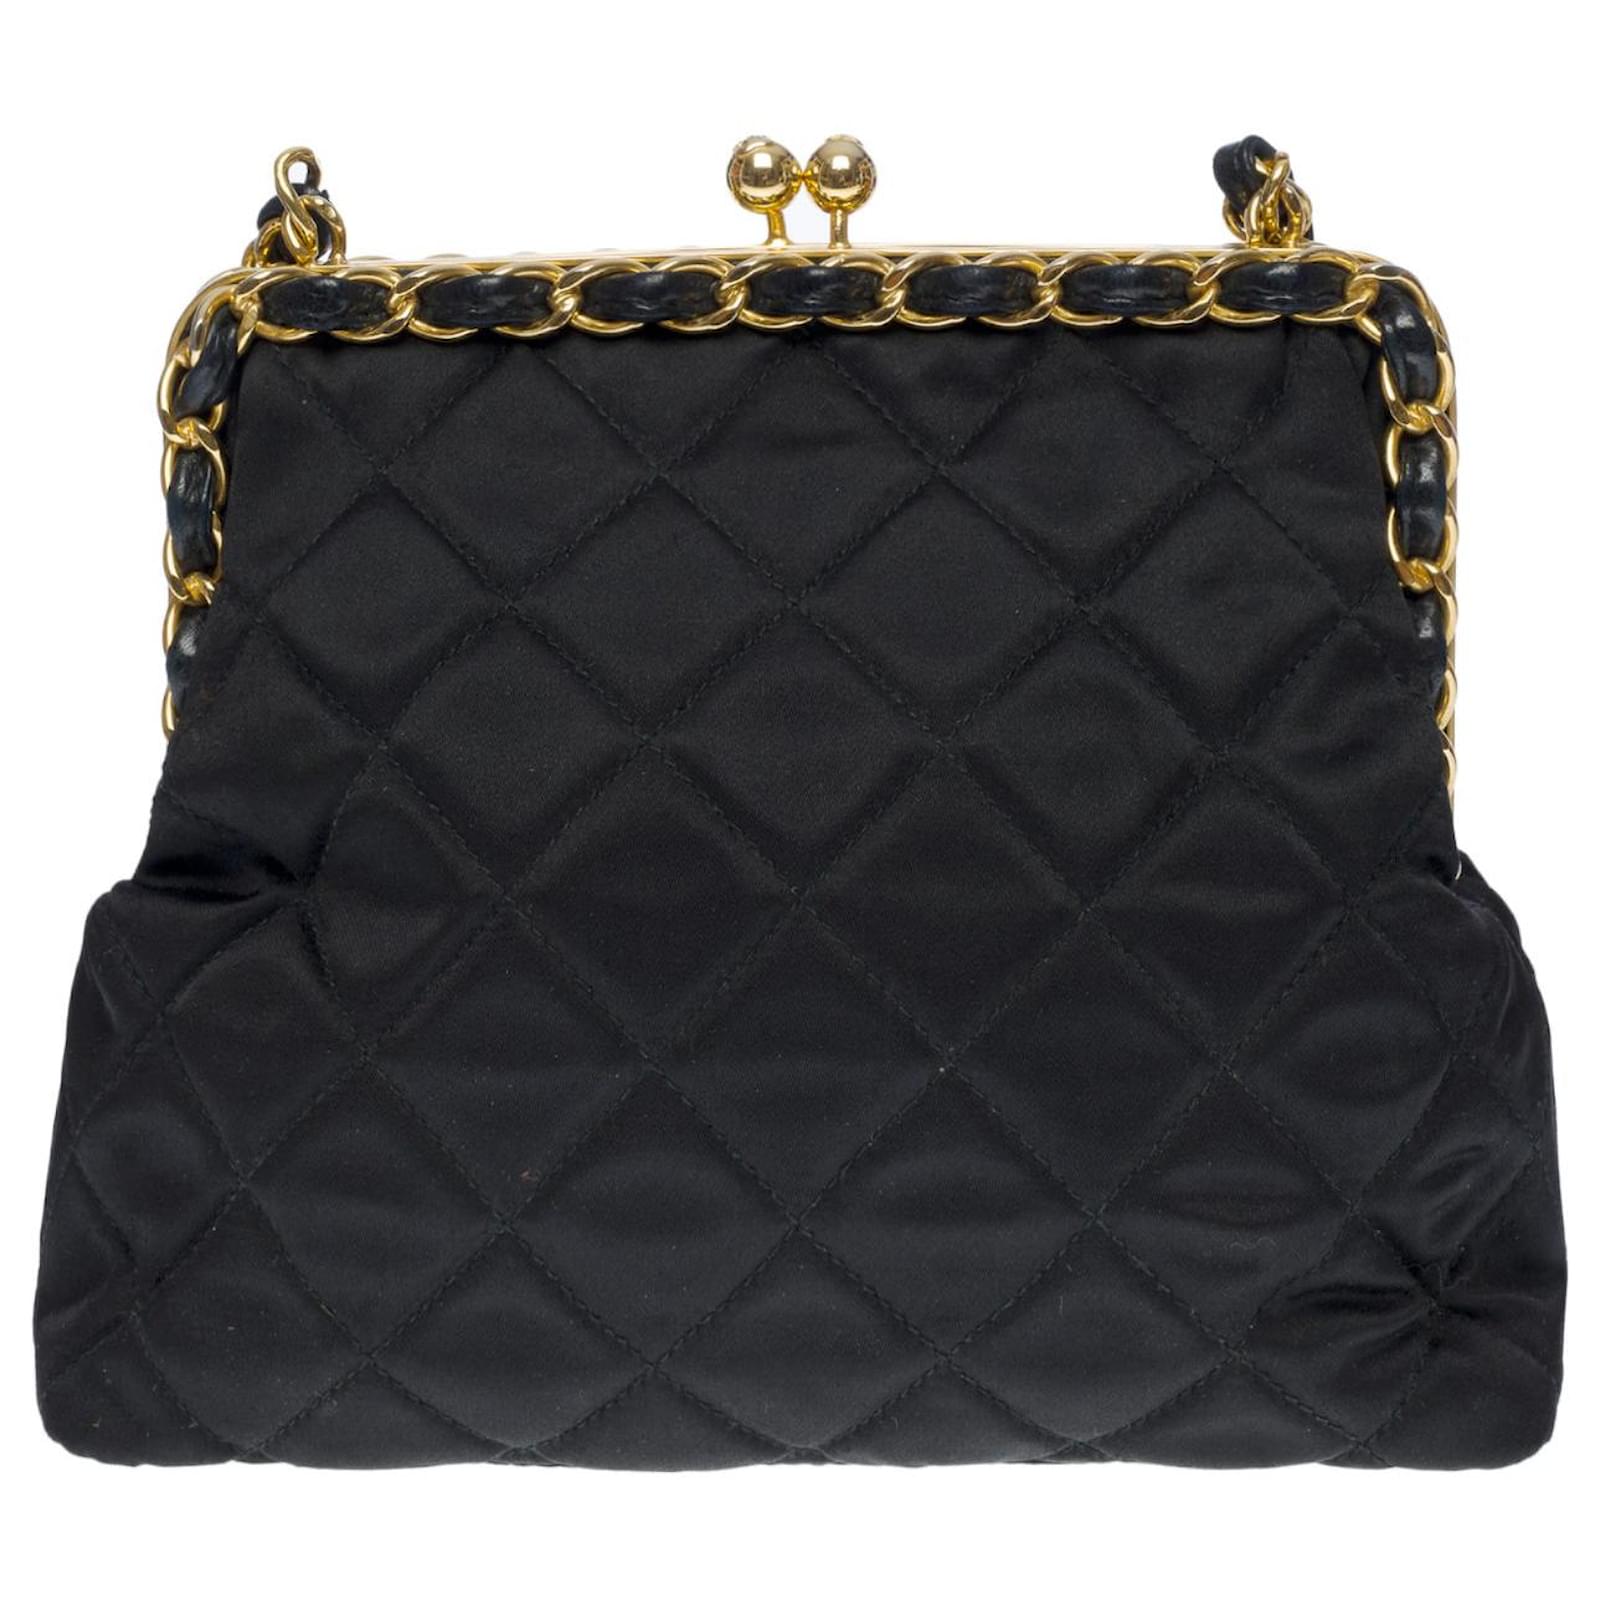 CHANEL CC Black Lambskin Quilted Gold e Evening Carryall Shoulder